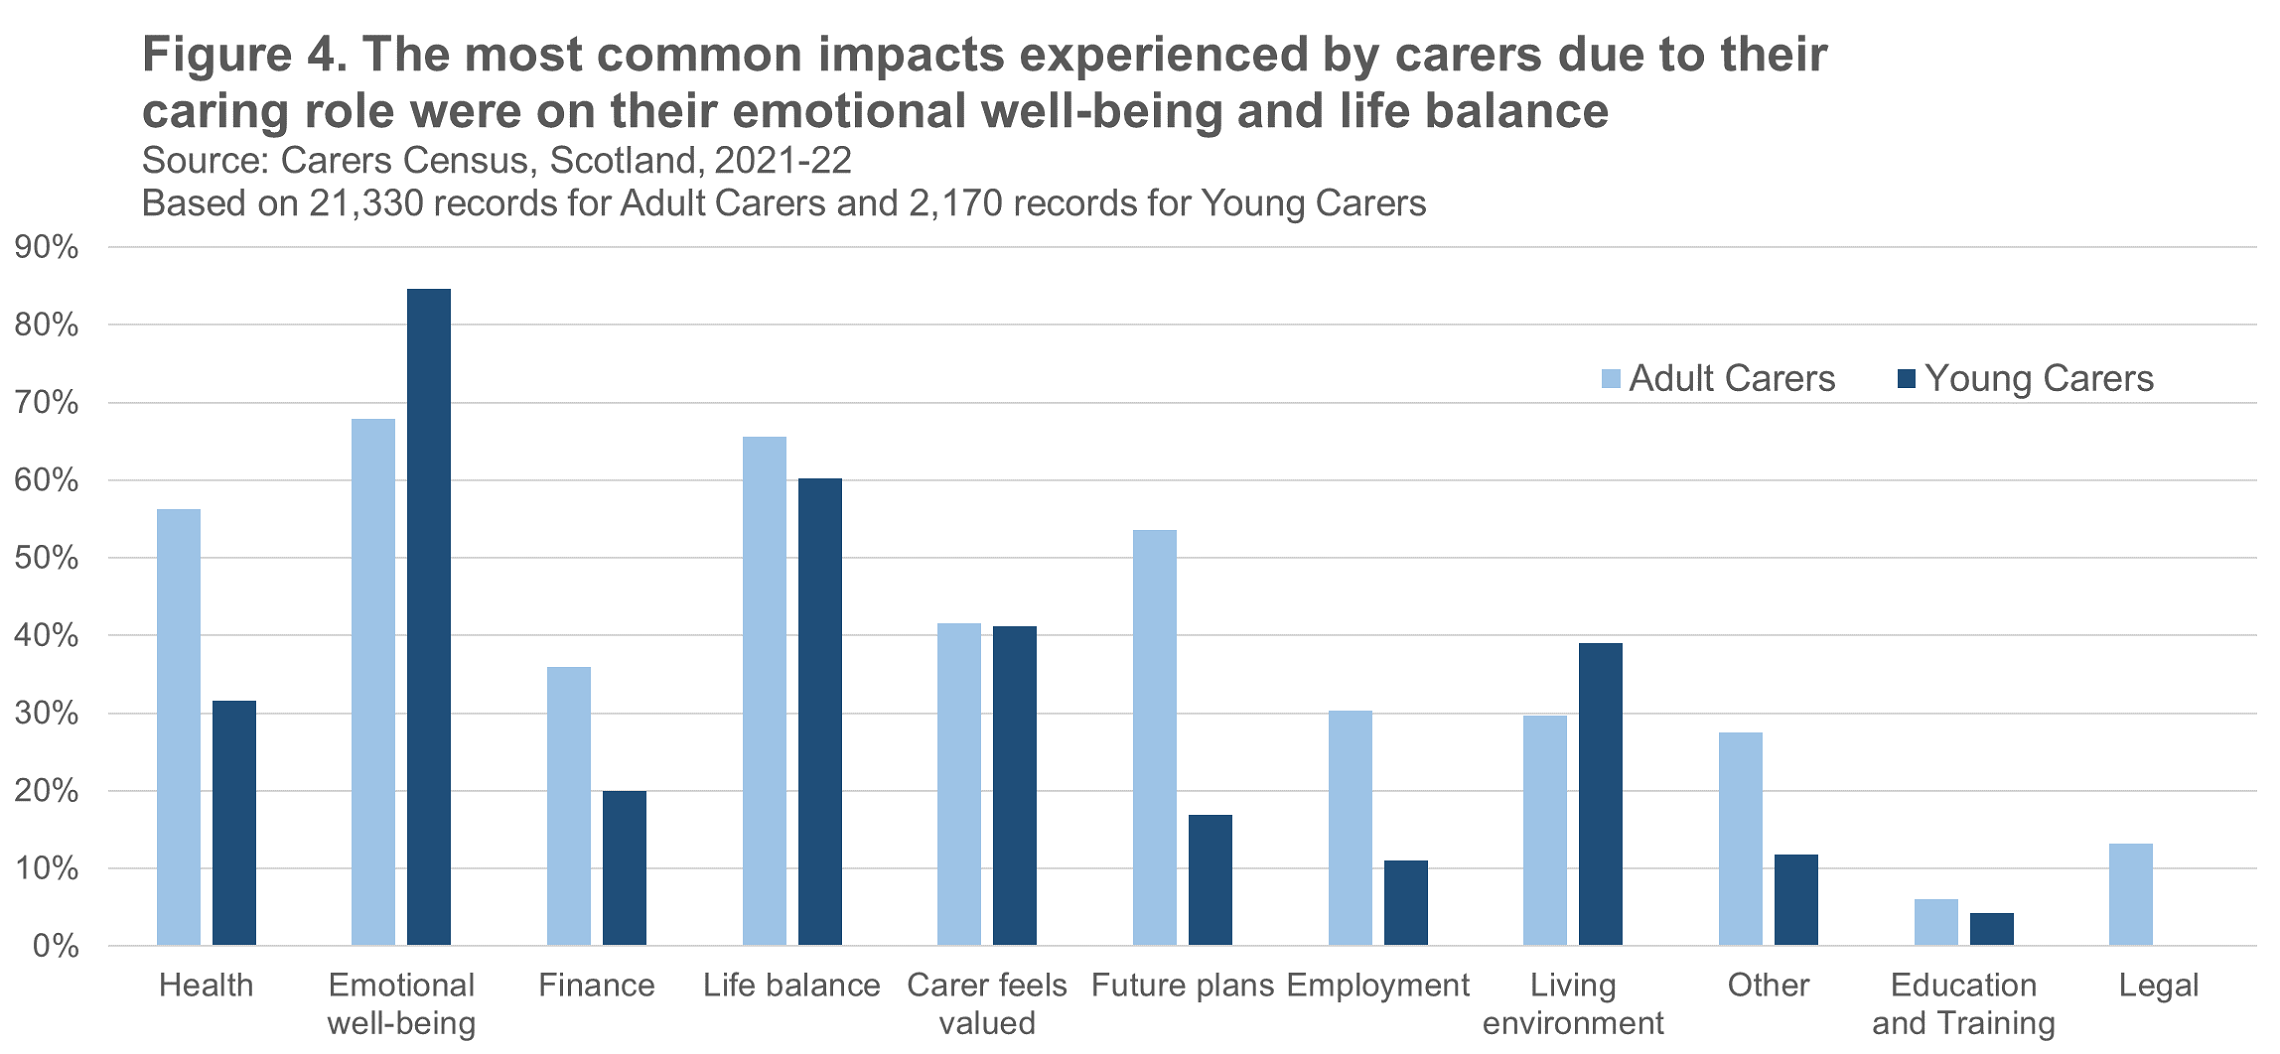 Bar chart showing impacts of caring reported in 2021-22. The most common impacts reported were on emotional well-being and life balance.